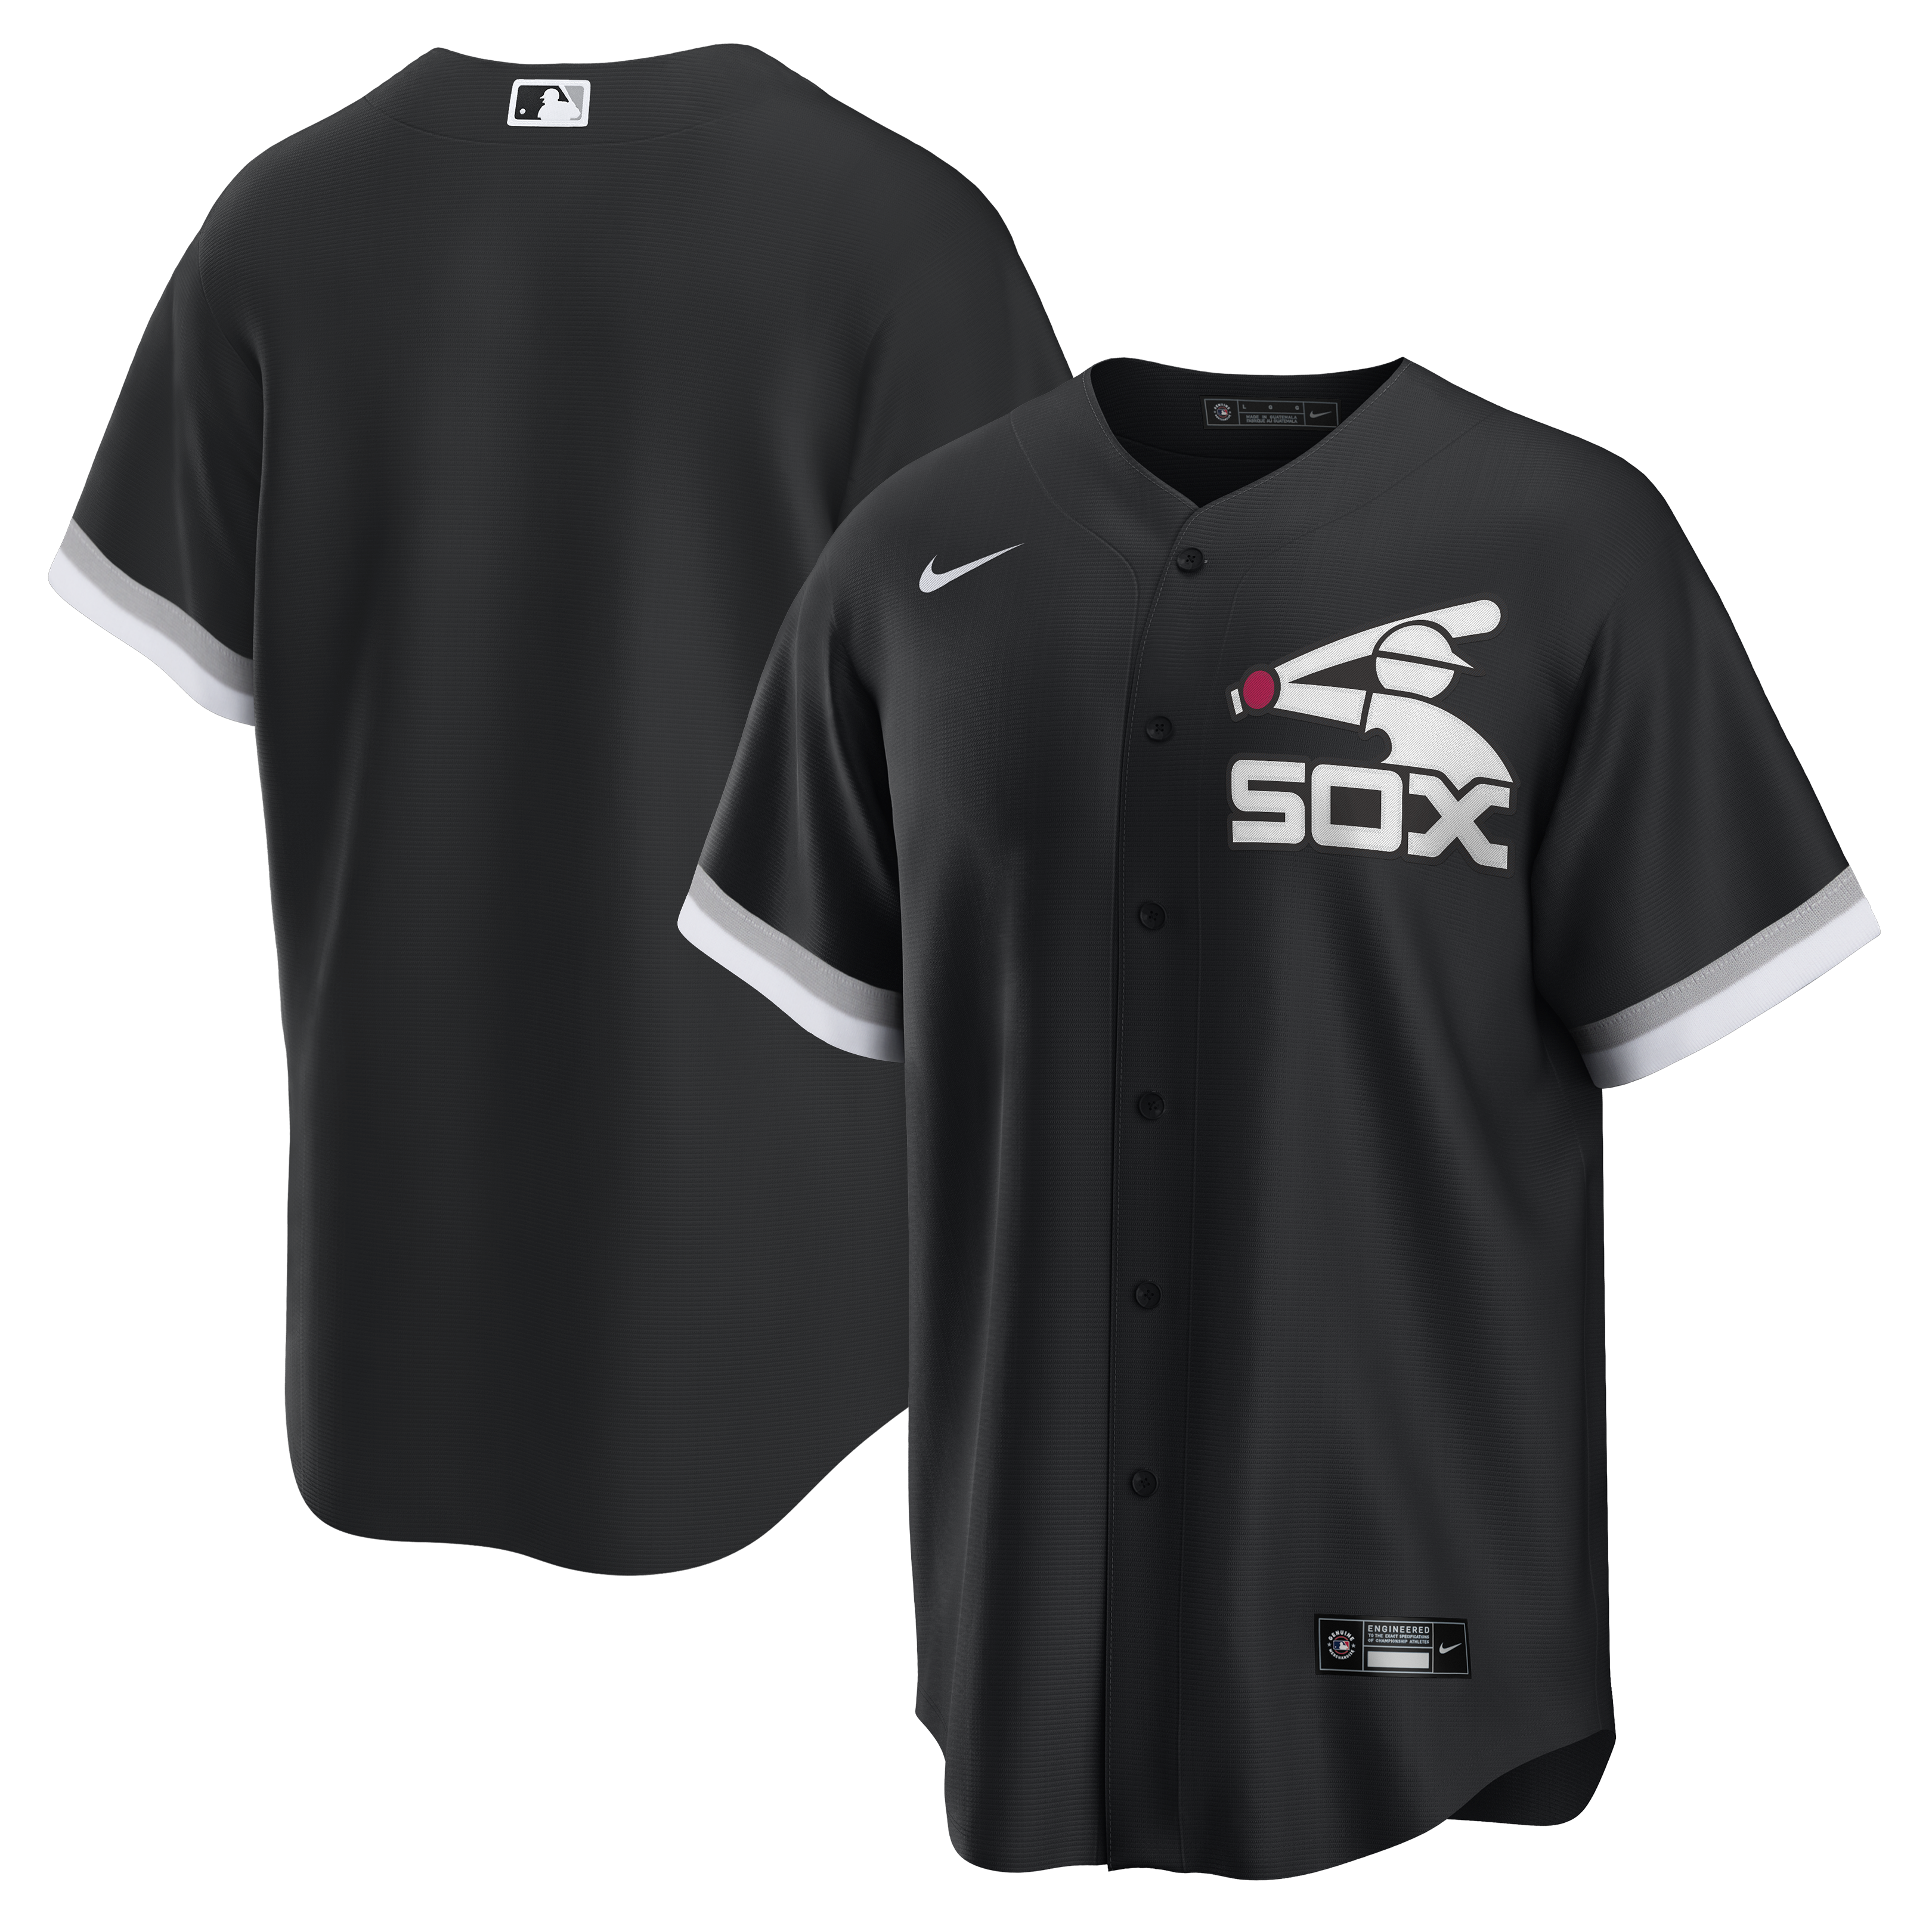 Chicago White Sox Mlb Nike Official Replica Home Jerseywhite Black -  Basket4Ballers